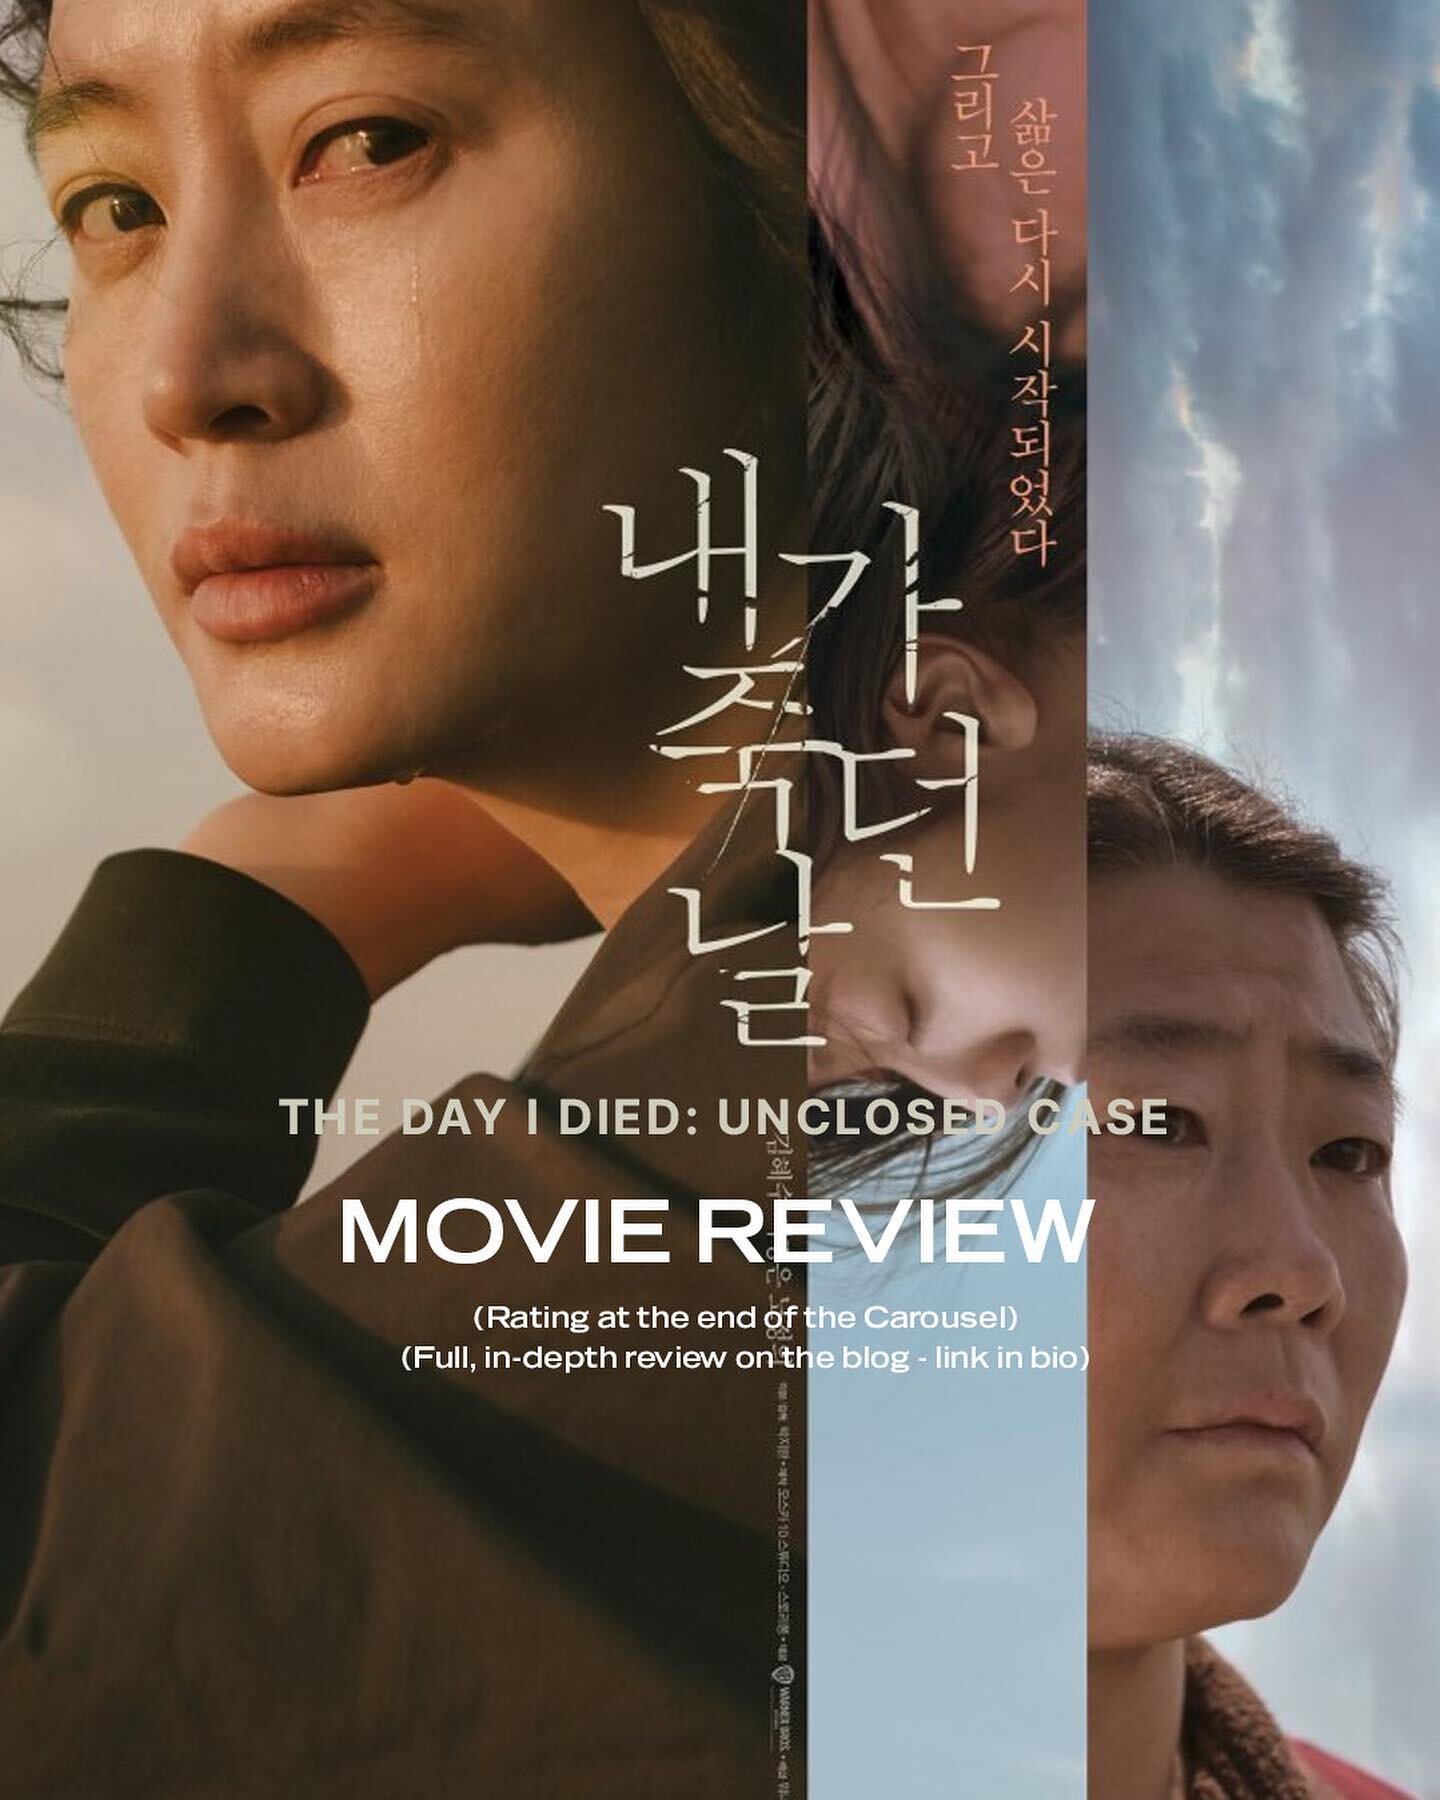 Long time no movie review! New one is up on the blog today for winner of Best Film Screenplay at this year&rsquo;s @baeksang.official, &lsquo;The Day I Died: Unclosed Case&rsquo;. Link in bio!